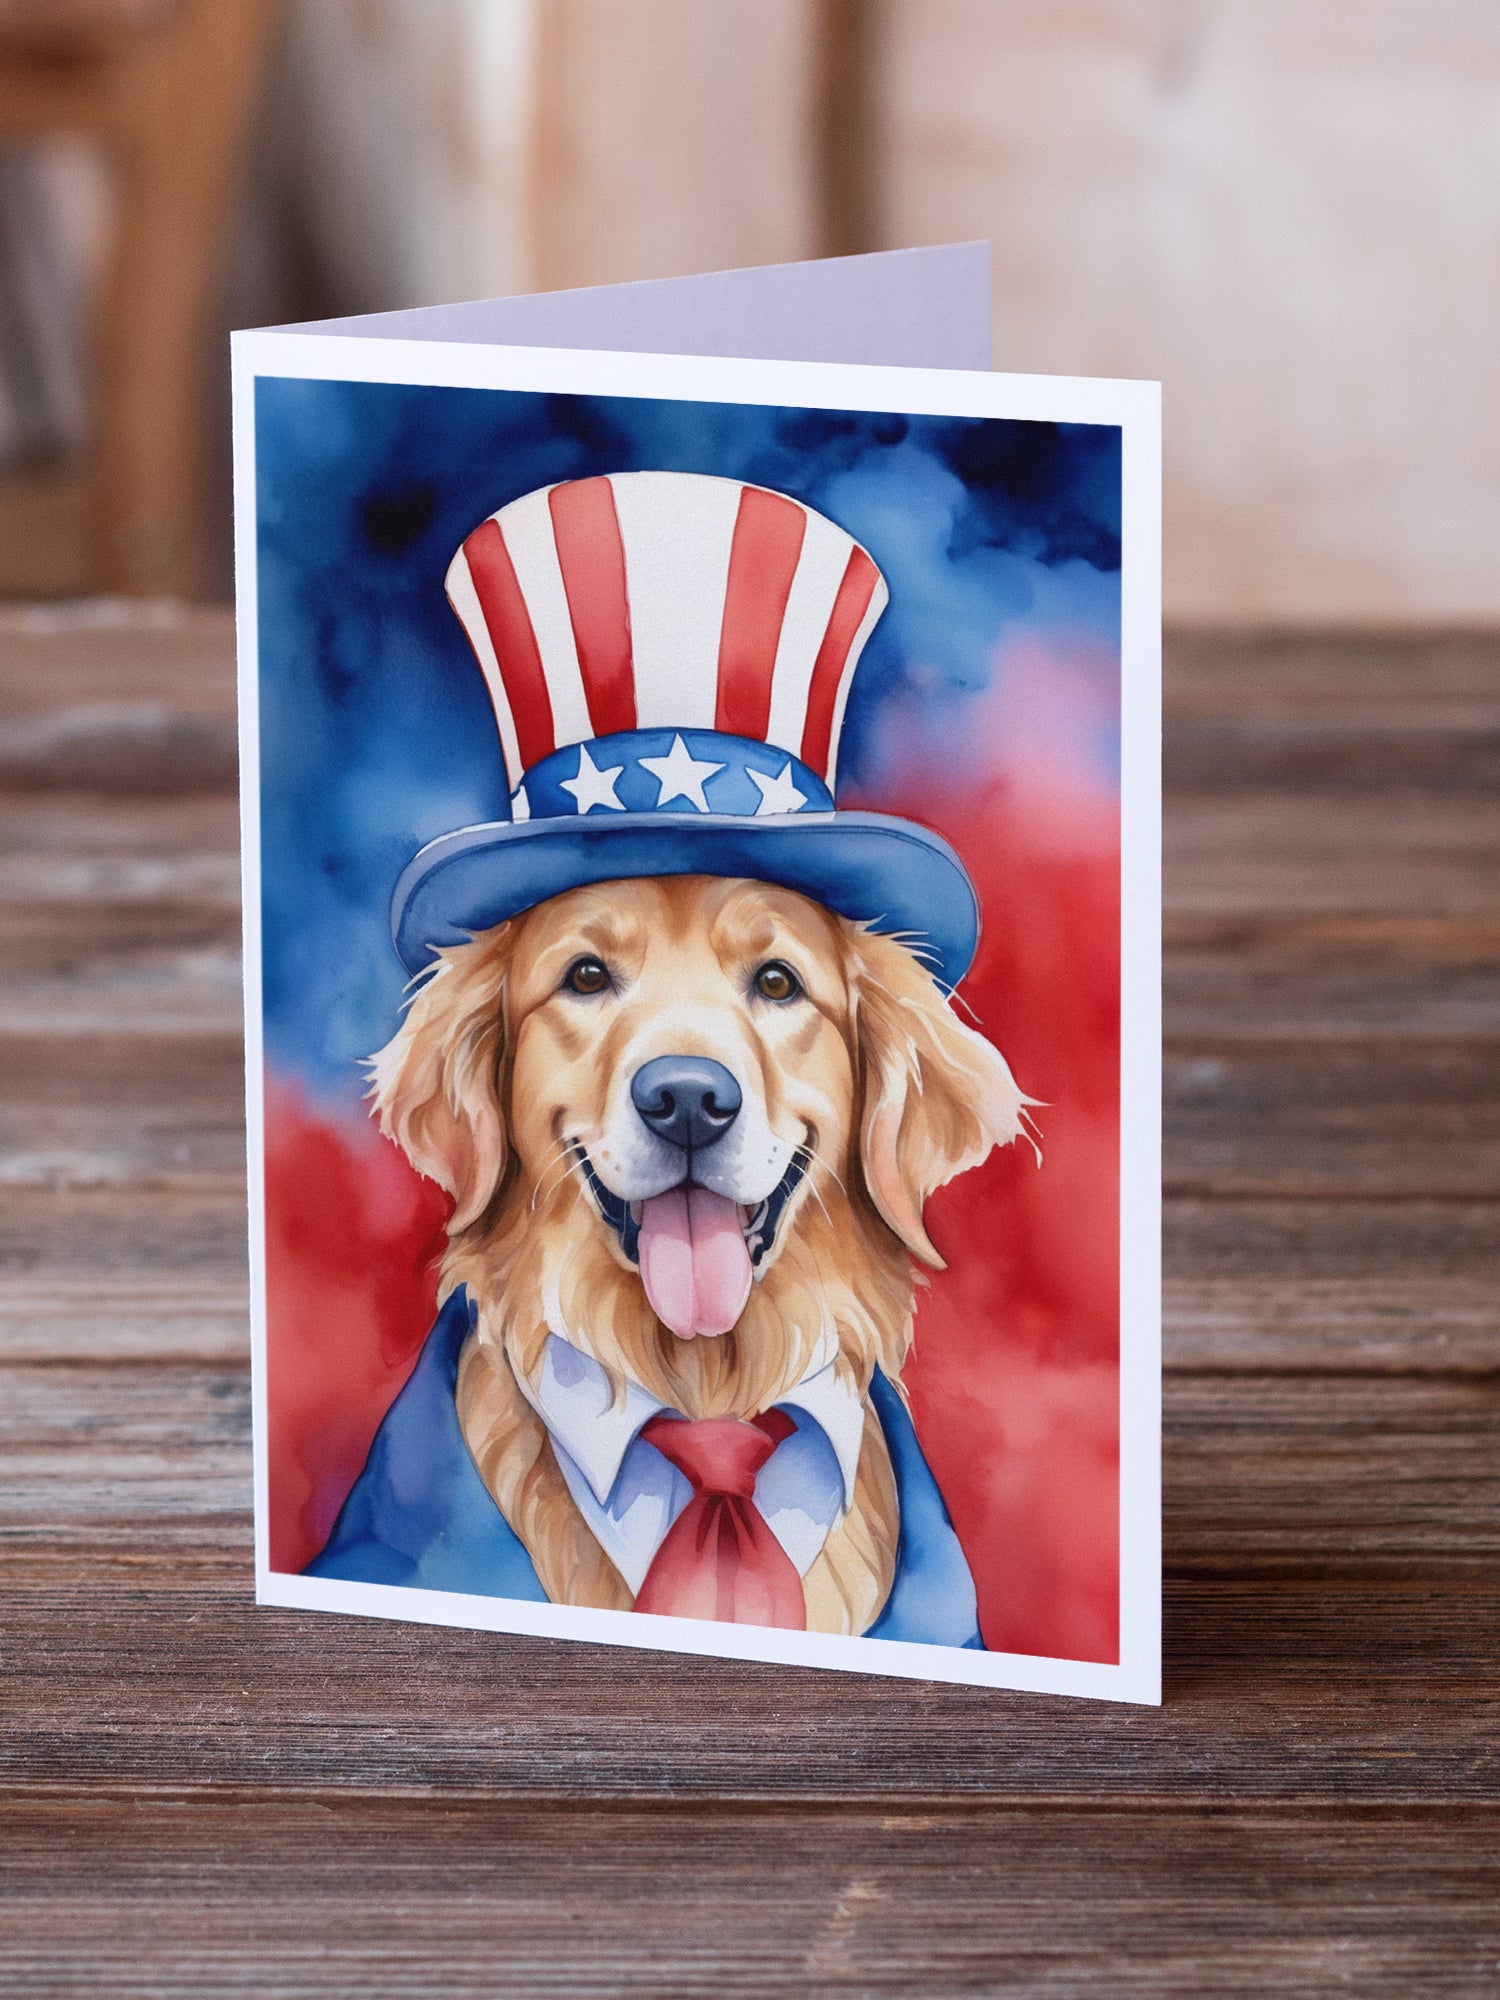 Buy this Golden Retriever Patriotic American Greeting Cards Pack of 8